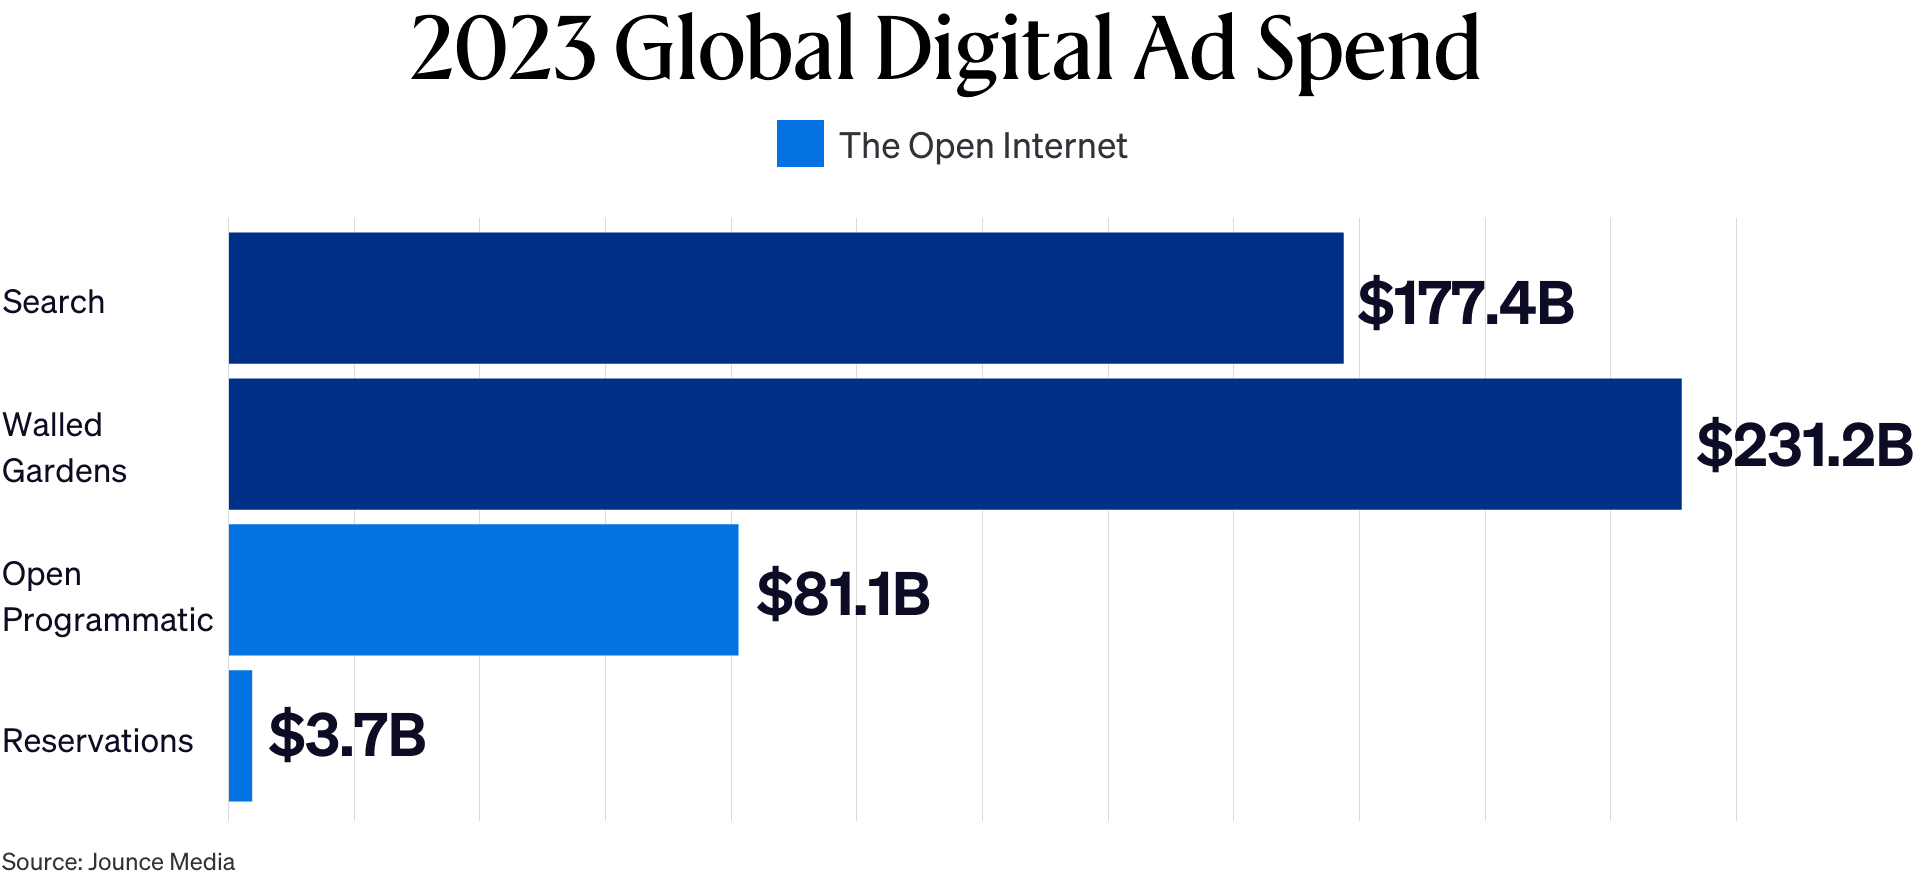 Graph showing 2023 Global Digital Ad Spend.